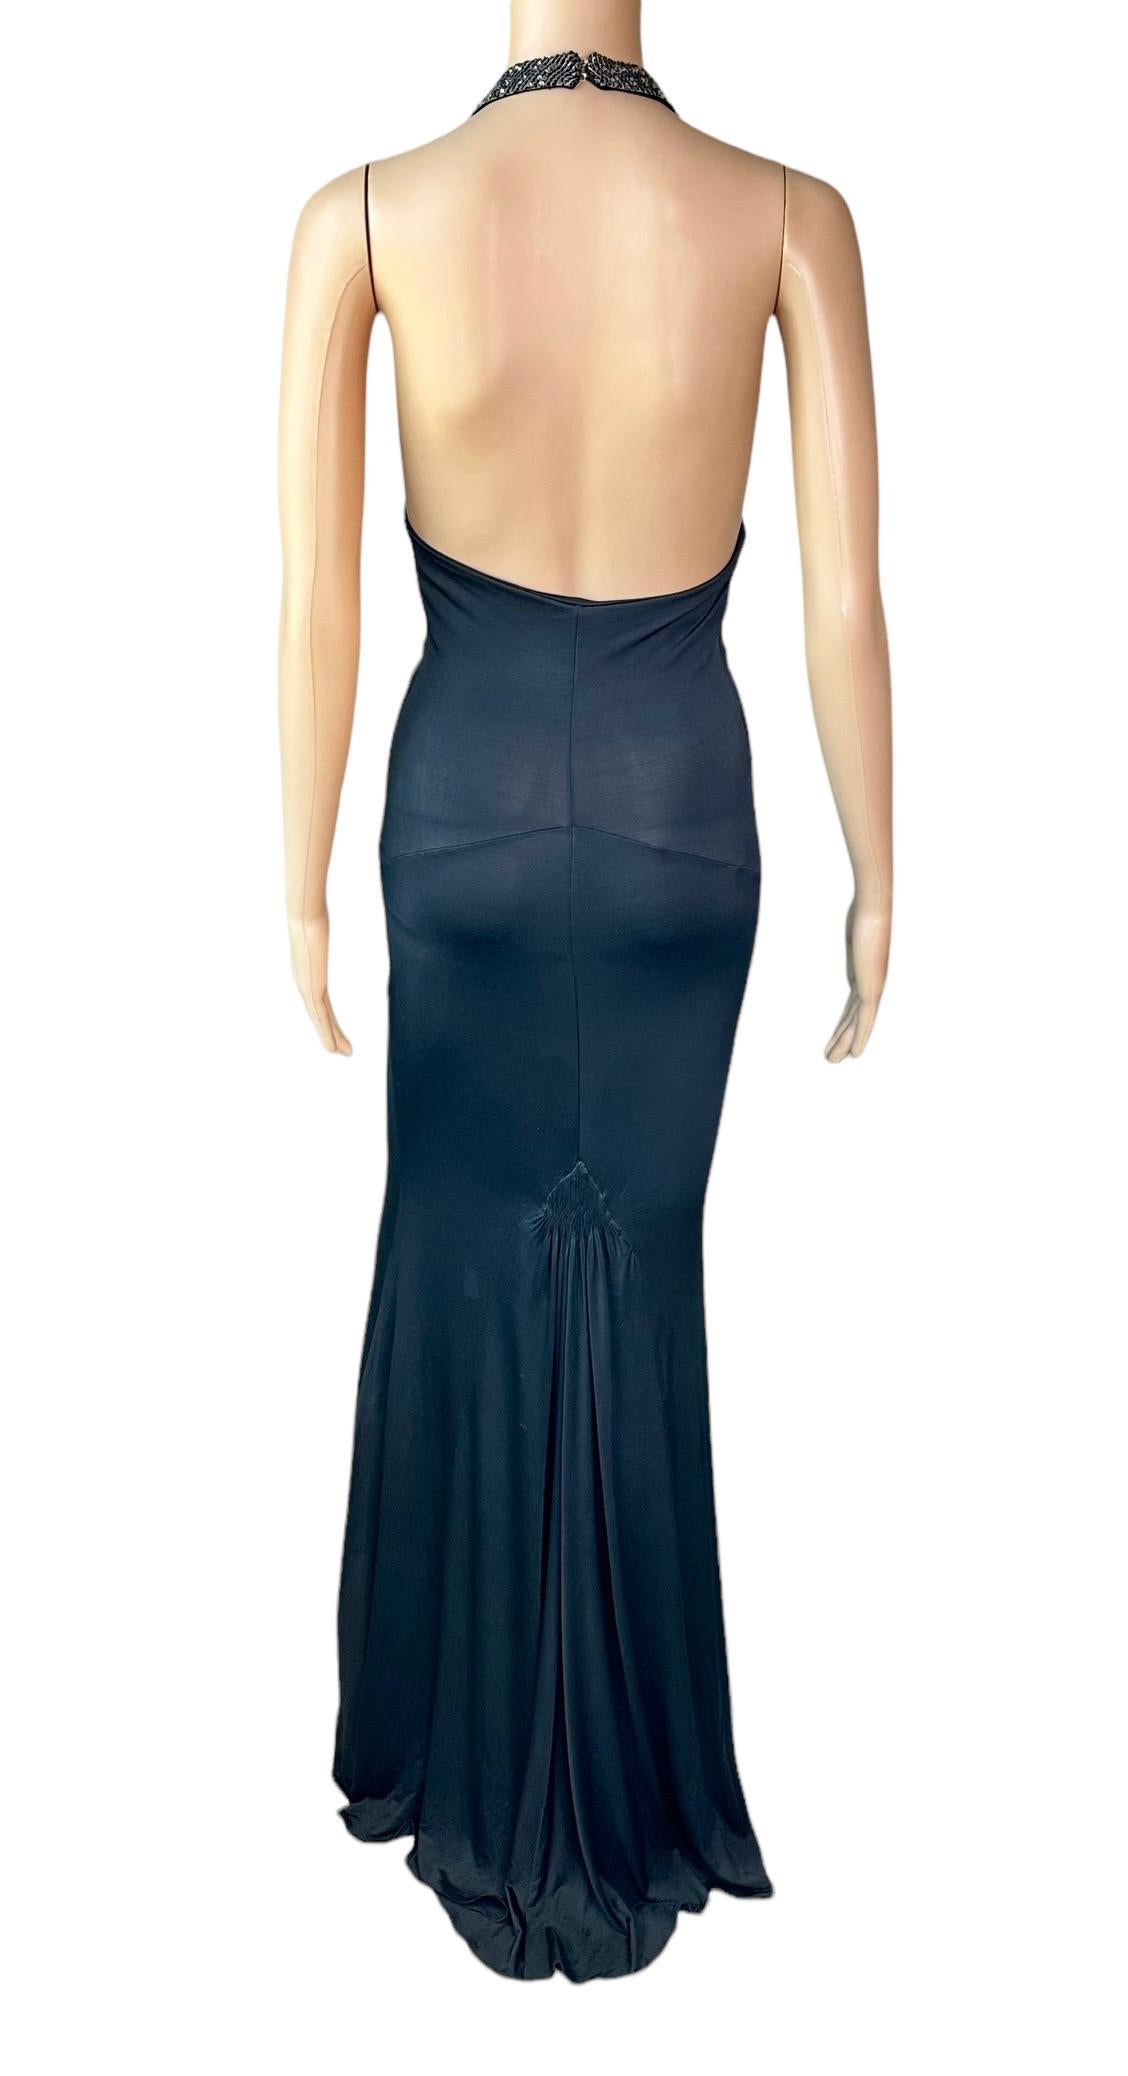 Roberto Cavalli S/S 2005 Embellished Plunging Neckline Black Maxi Evening Dress In Good Condition For Sale In Naples, FL